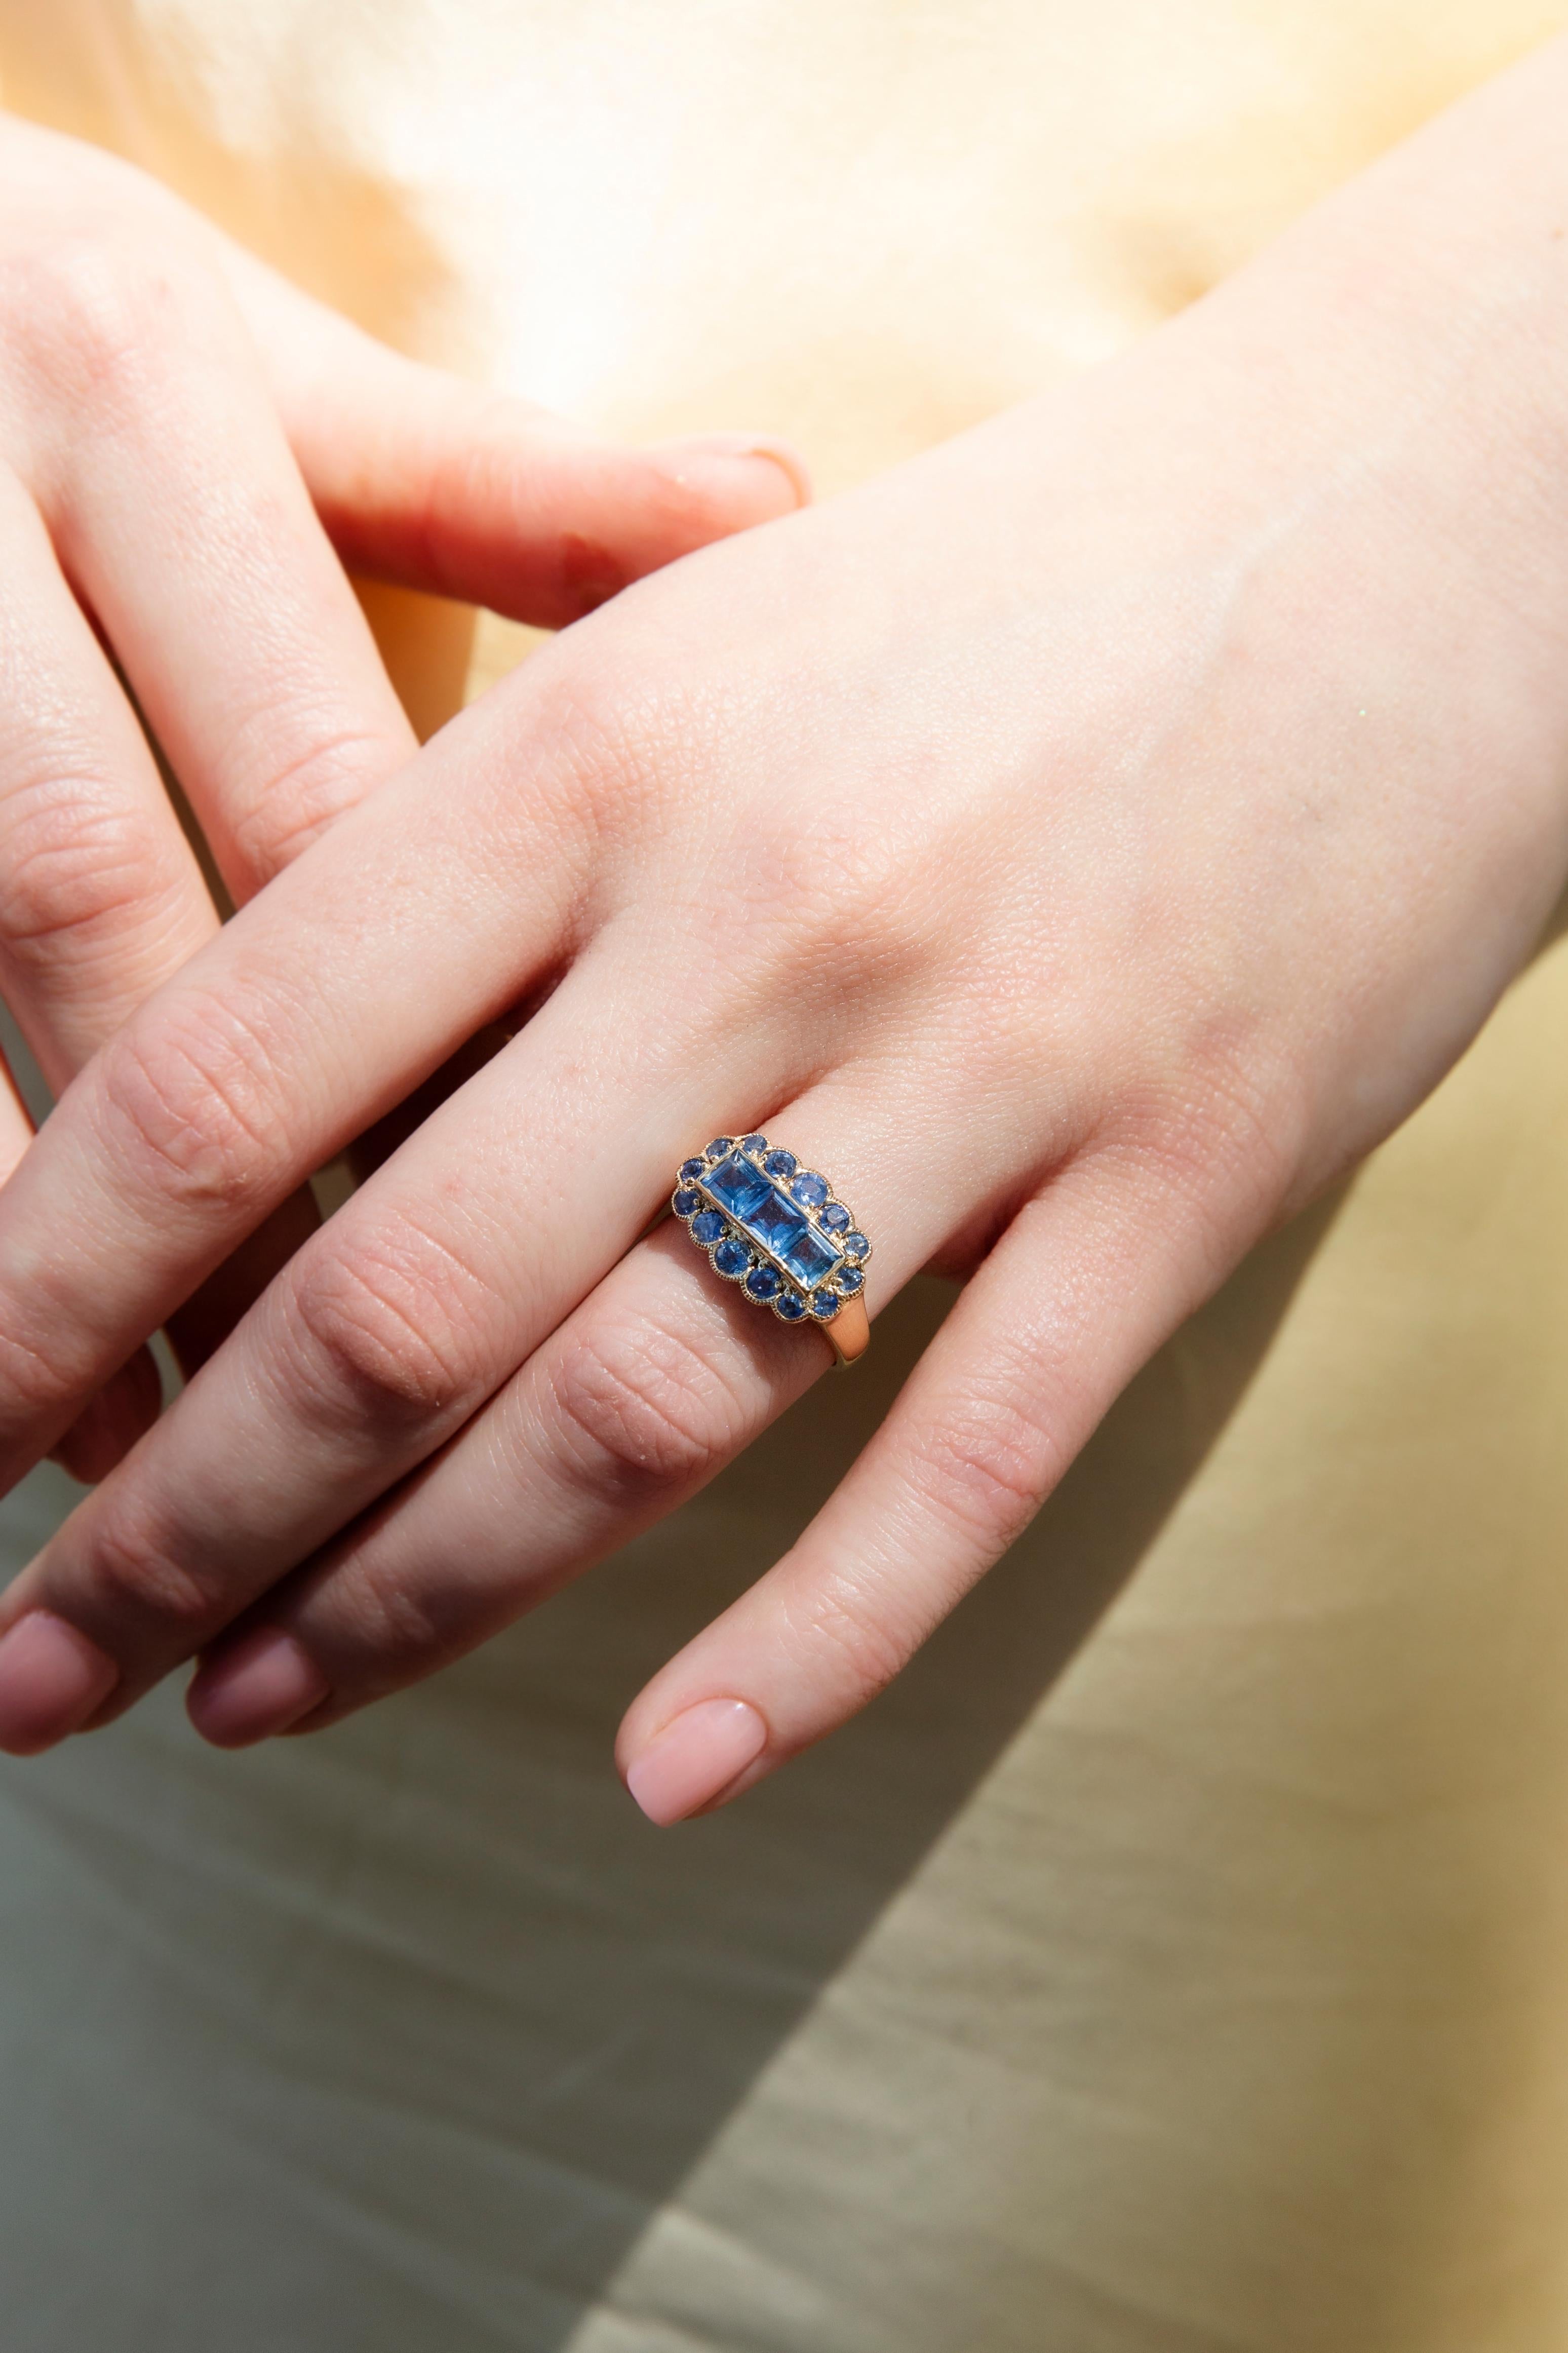 The Ingrid Ring is a nod to a star of yesteryear who graced the silver screen with irresistible allure and boundless grace. Her bright blue square sapphire trio, set within a cloud-like sapphire border, evokes a world of glitz and glamour where red